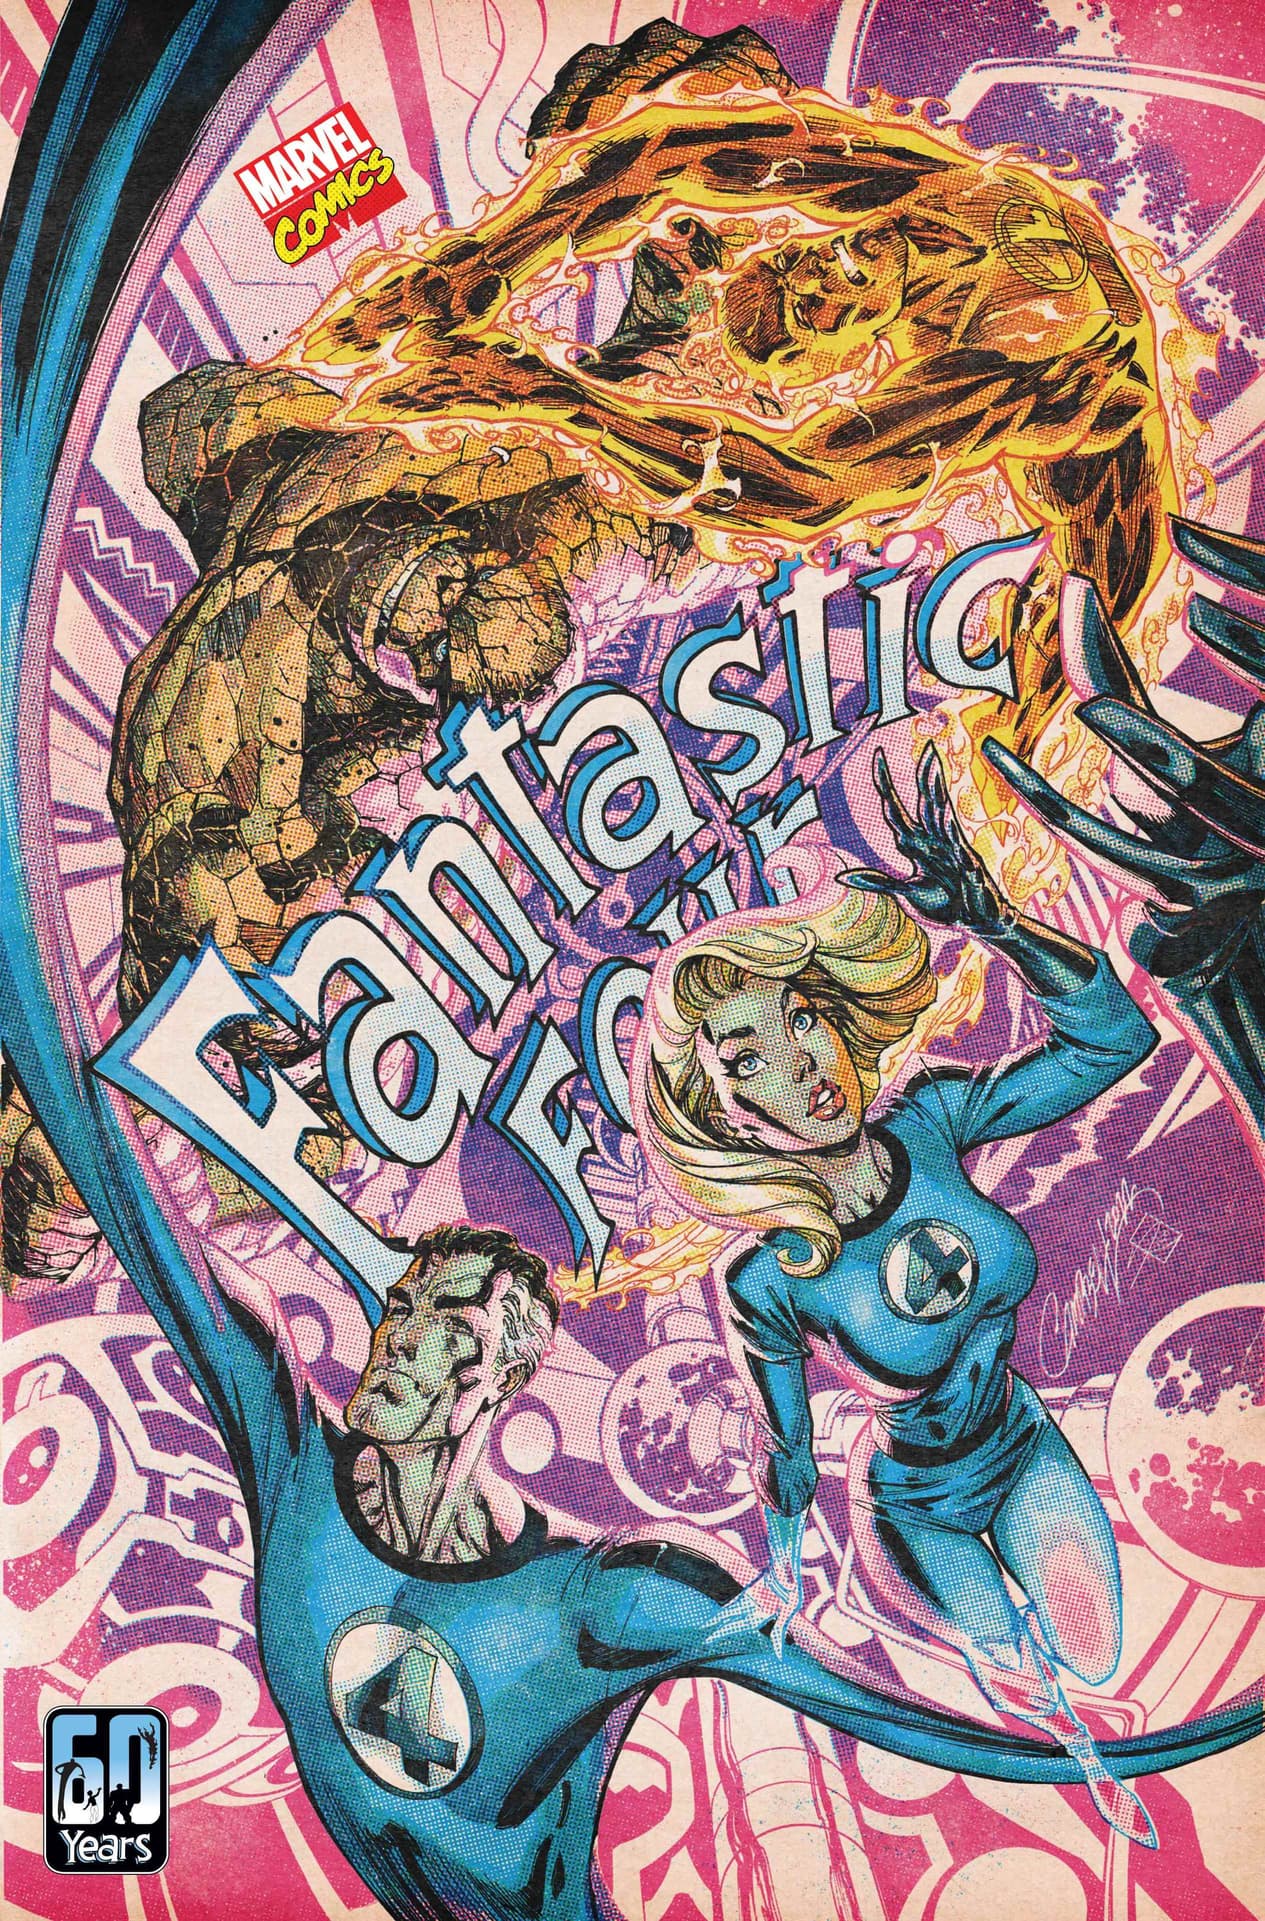 FANTASTIC FOUR #1 Retro Anniversary Variant Cover by J. Scott Campbell